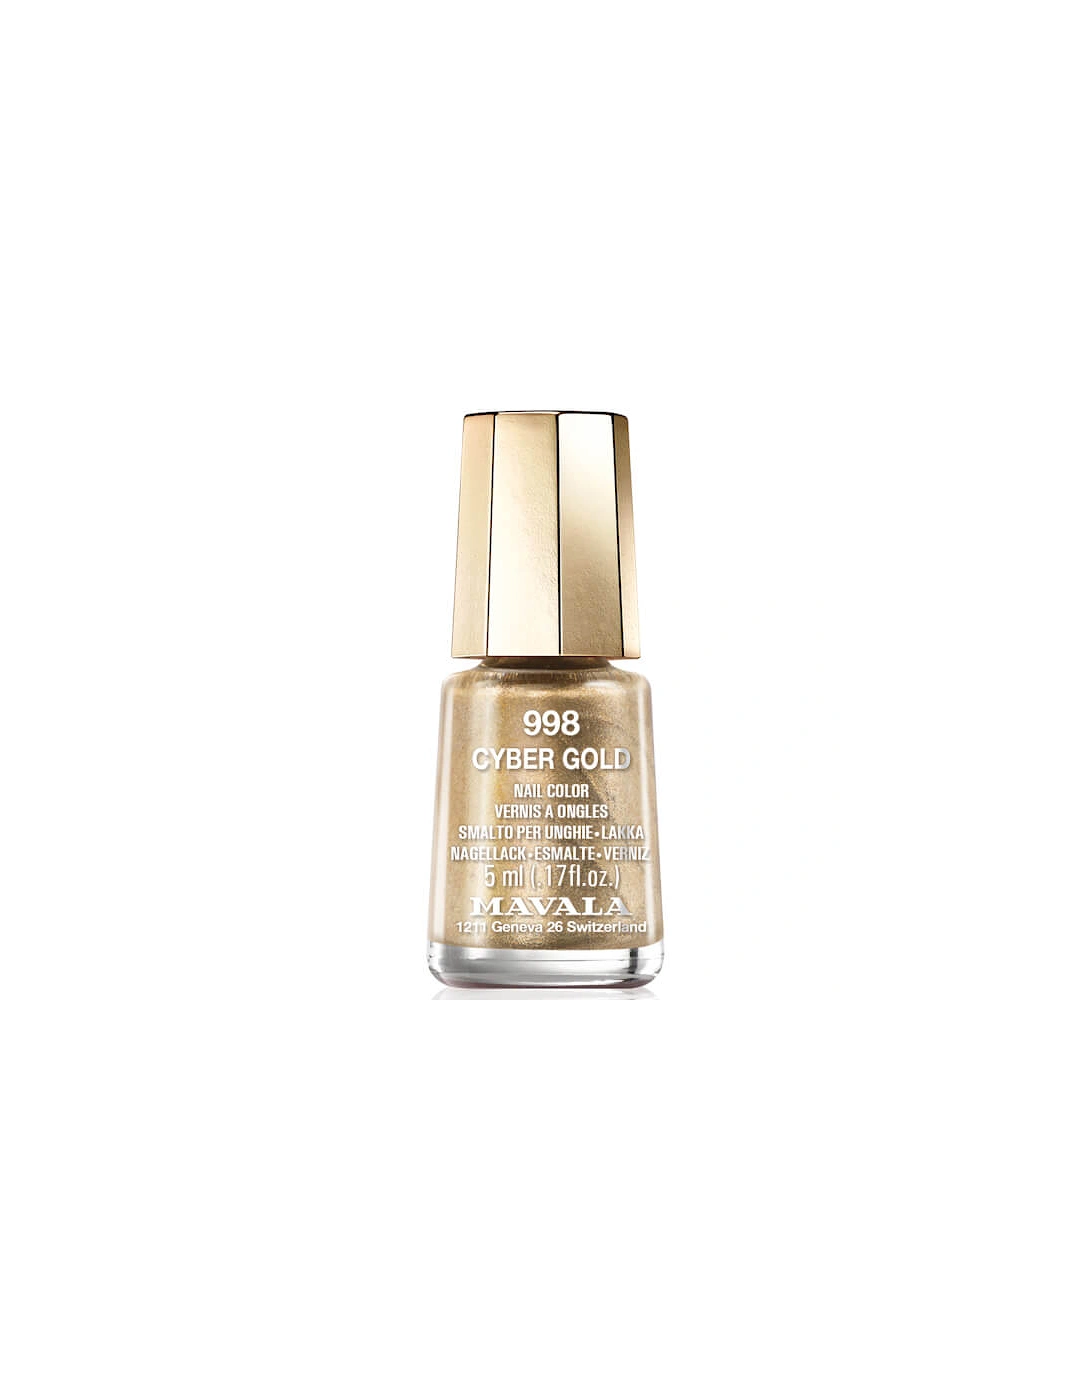 Cyber Chic Mini Colour Nail Varnish - Cyber Gold, 2 of 1